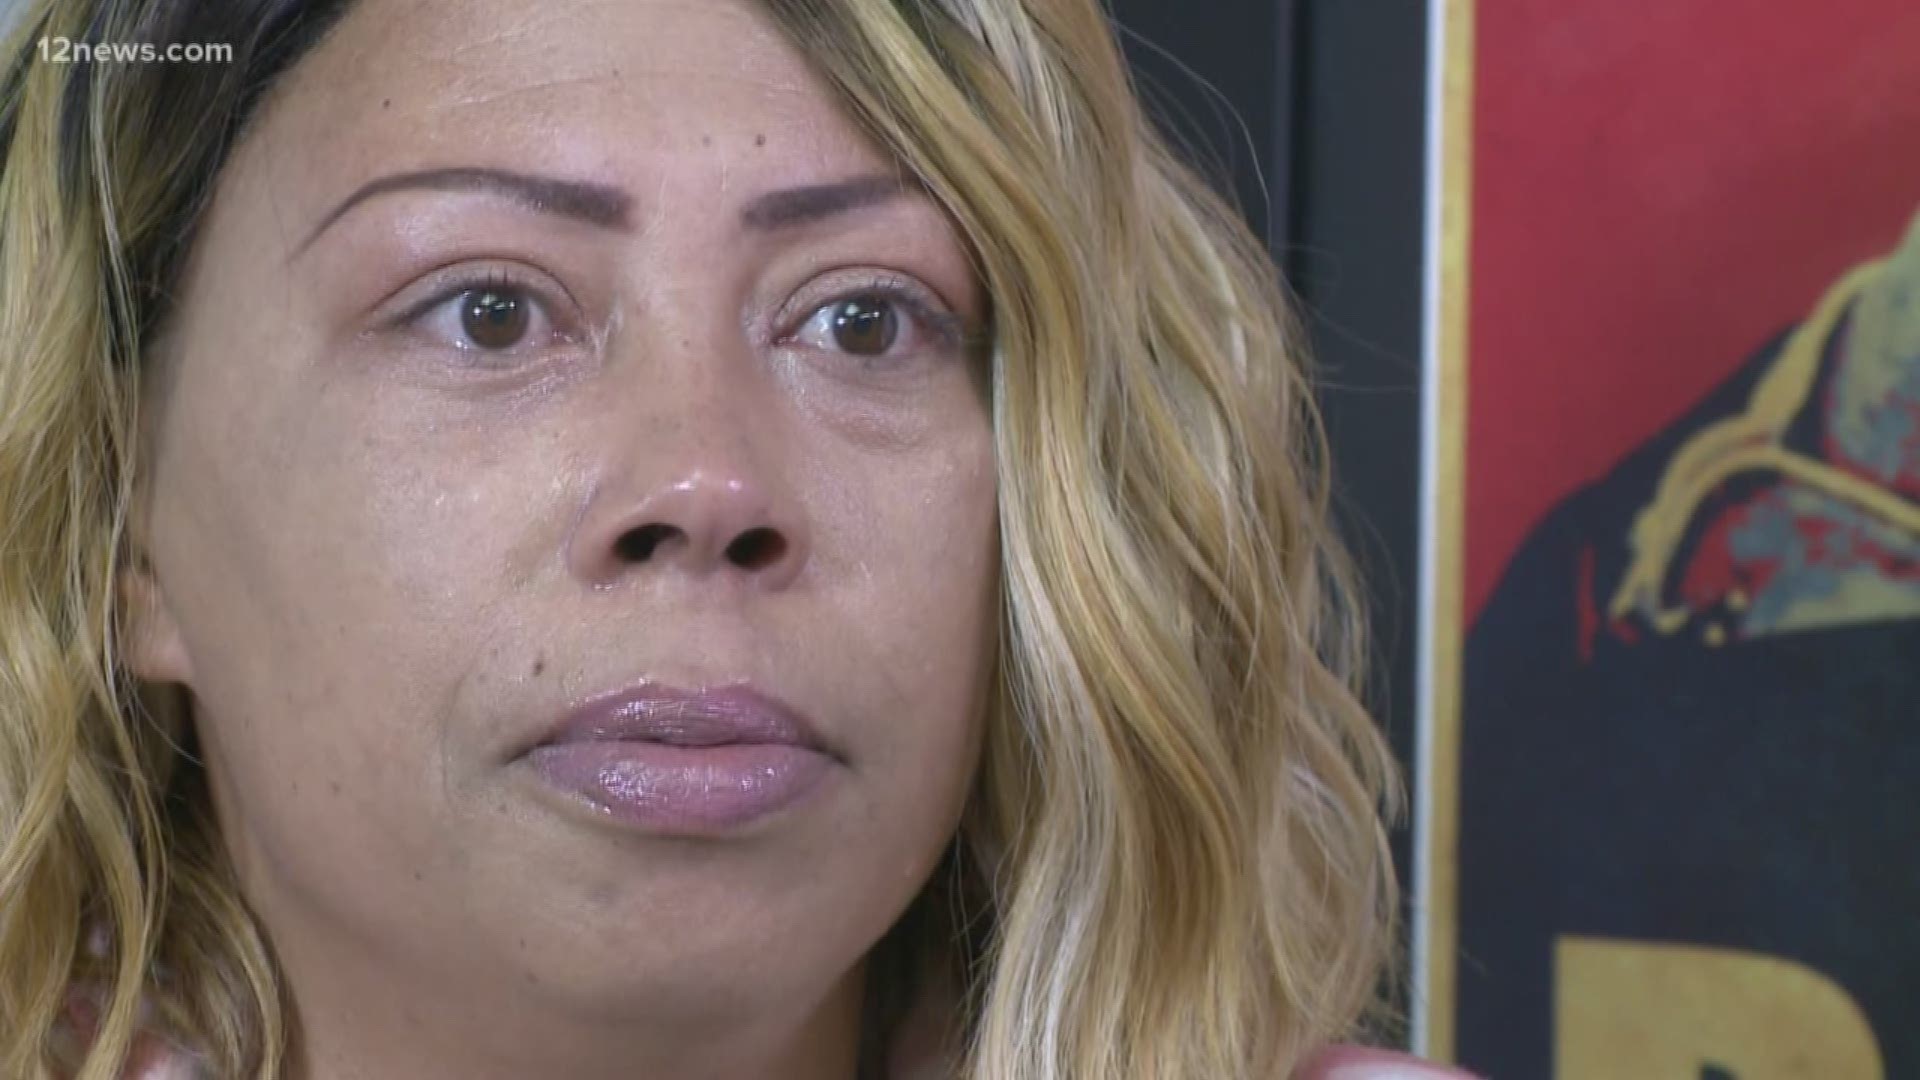 A woman at the center of an illegal body cavity search is sharing her story publicly for the first time. Erica Reynolds claims police worked to cover it up.